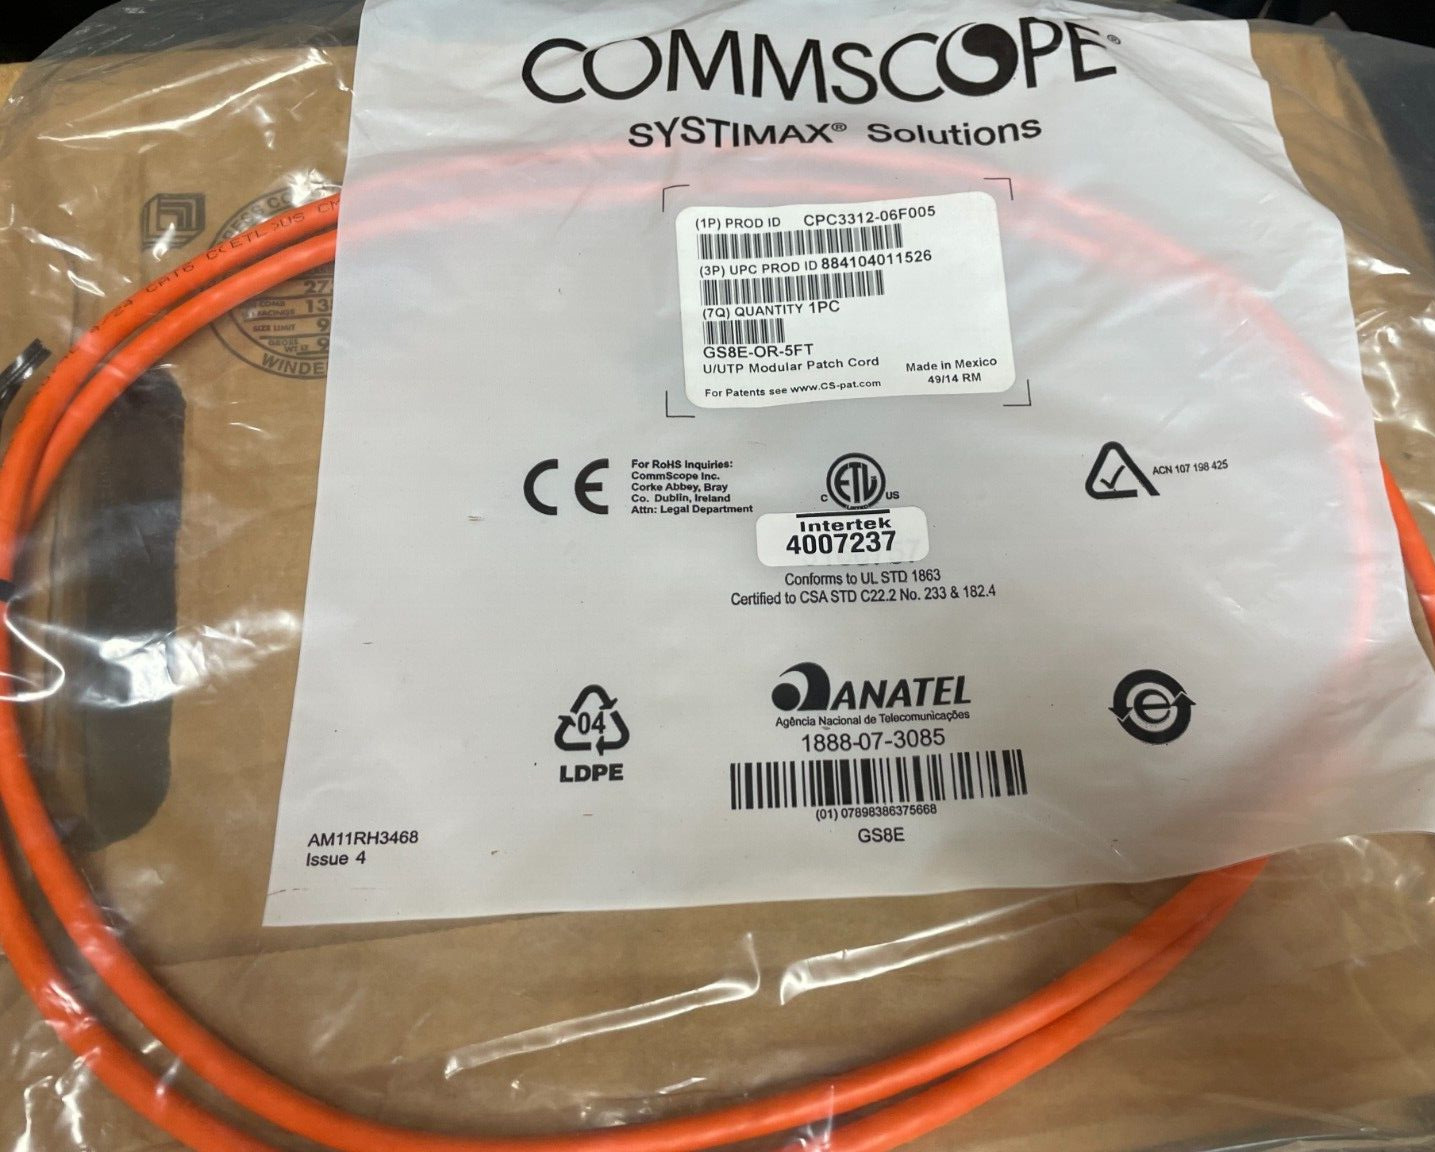 CommScope Systimax Solutions Patch Cable Orange 5ft U/UTP Modular Cord New